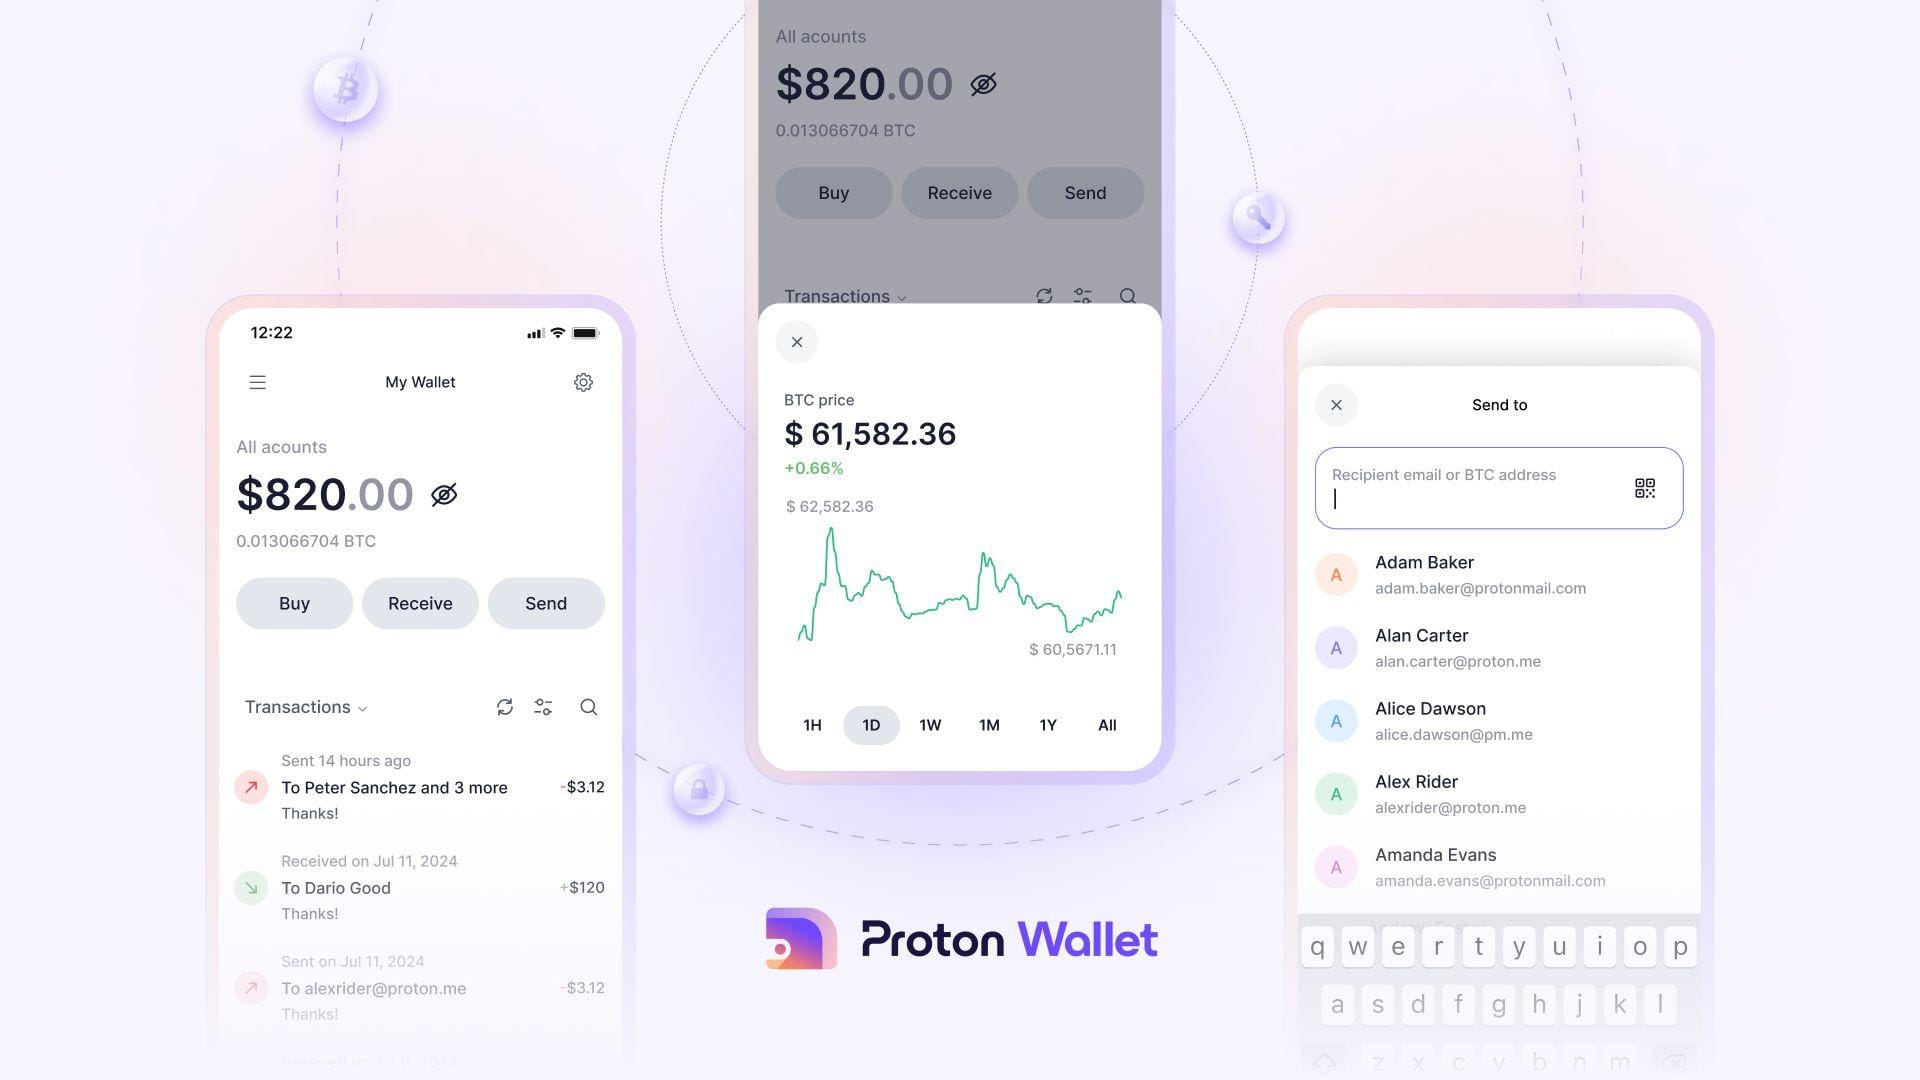 Proton Wallet Attempts to Make Cryptocurrency Safer and Simpler as a Bitcoin Wallet